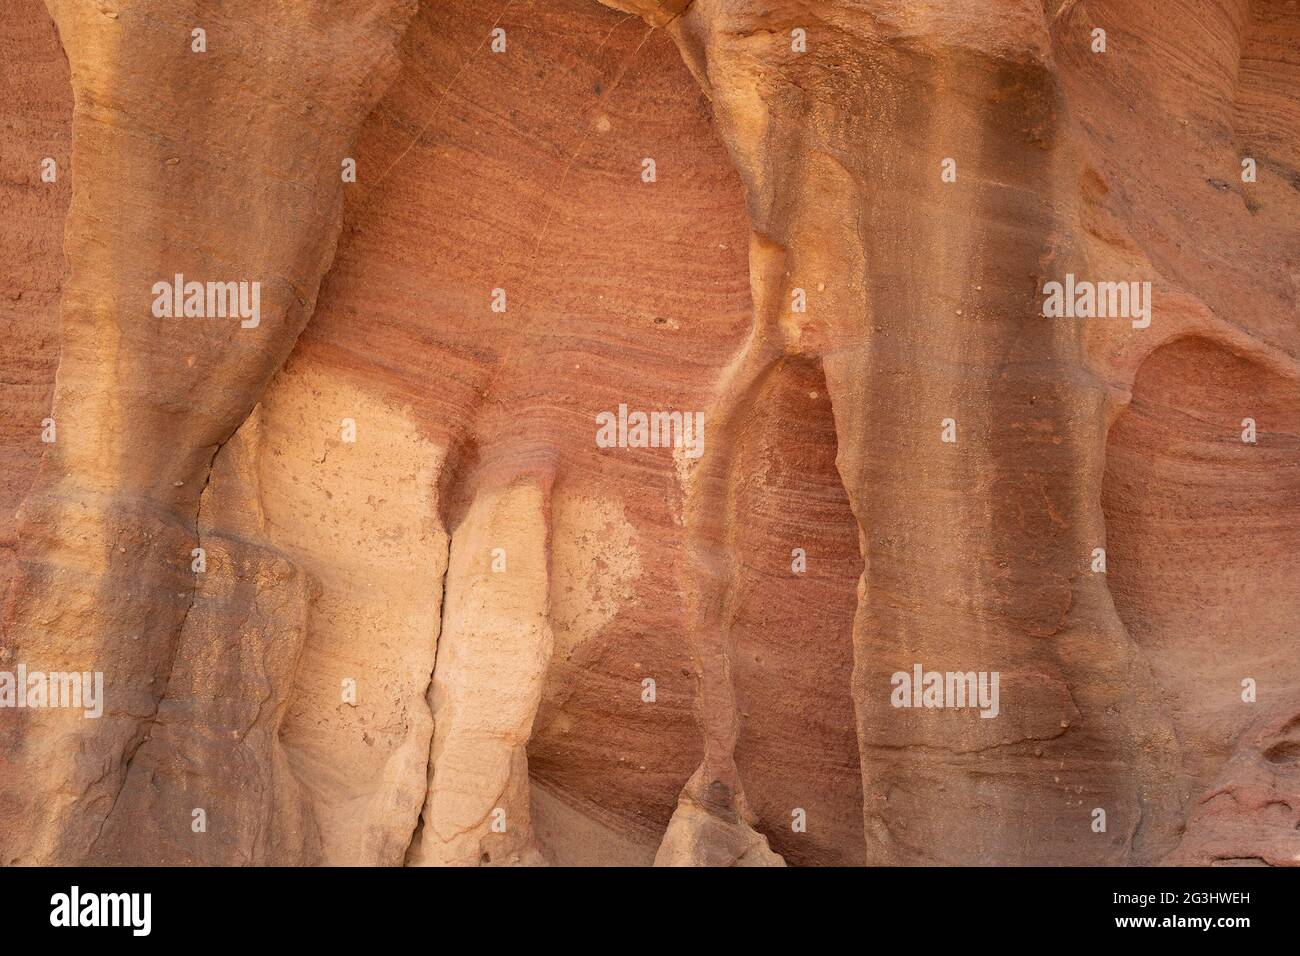 A unique colorful eroded sedimentary rock formation in the Timna valley park, the Negev desert, southern Israel. Stock Photo